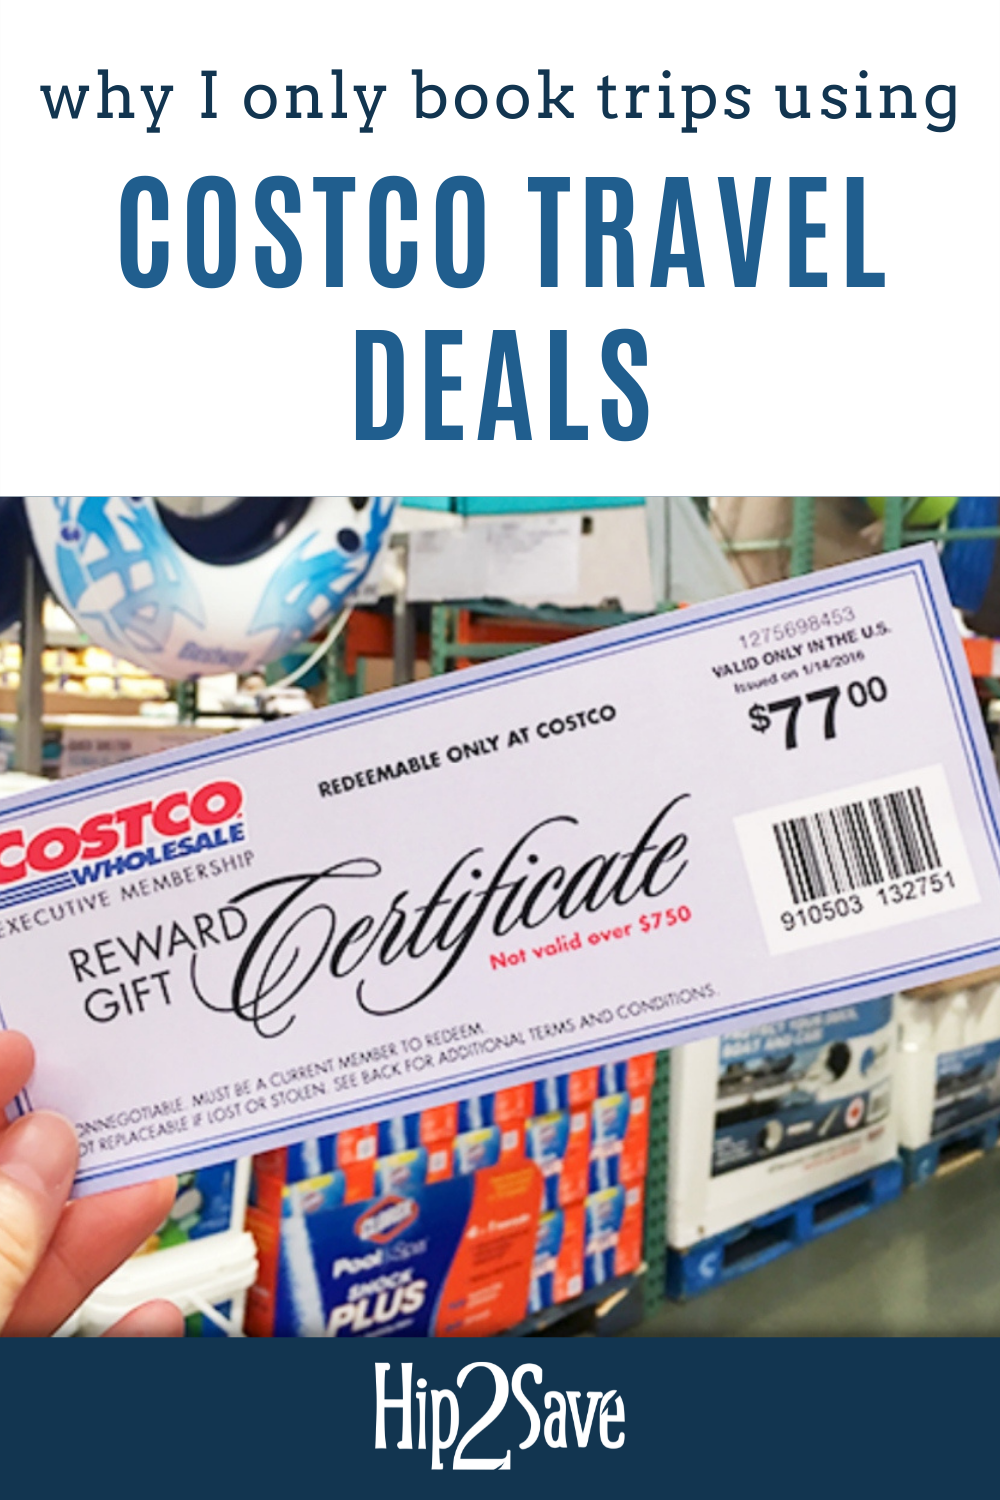 Costco Travel Gets You Deals On Vacations & There Are Savings You Might Be  Missing Out On - Narcity